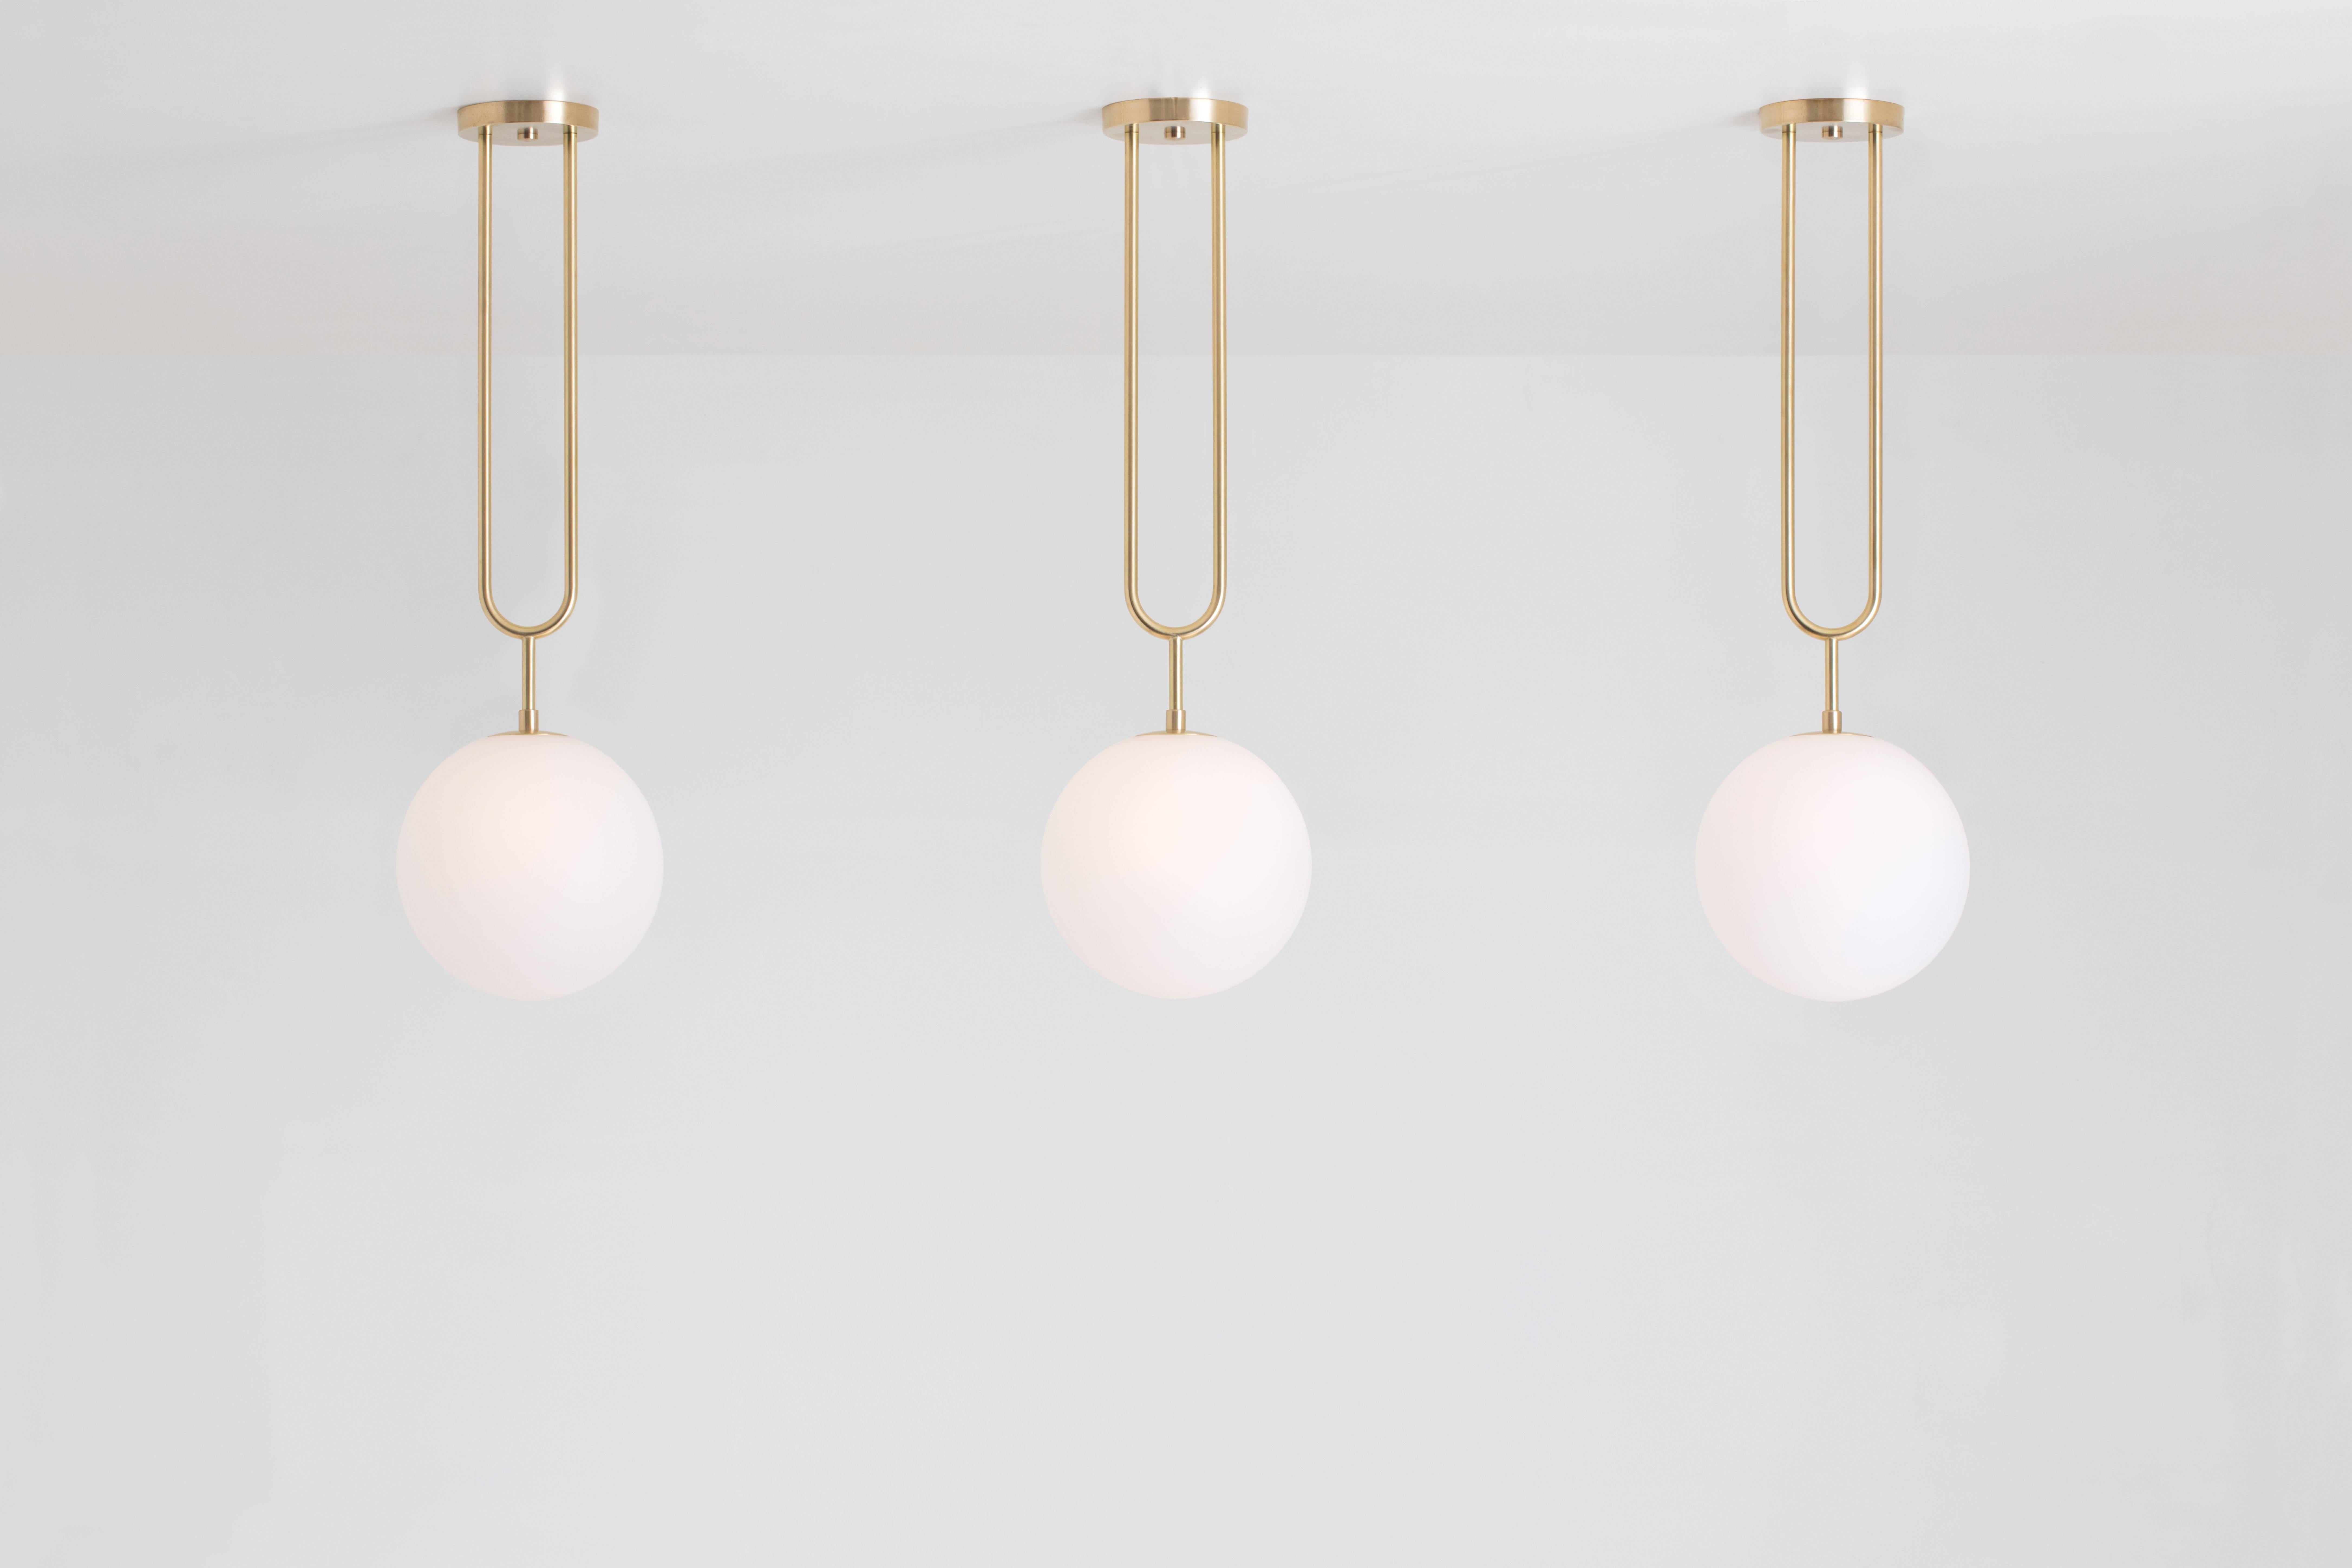 Hand-Crafted Koko, a Modern Pendant Light with Satin Globe Shade in Matte Black and Wood